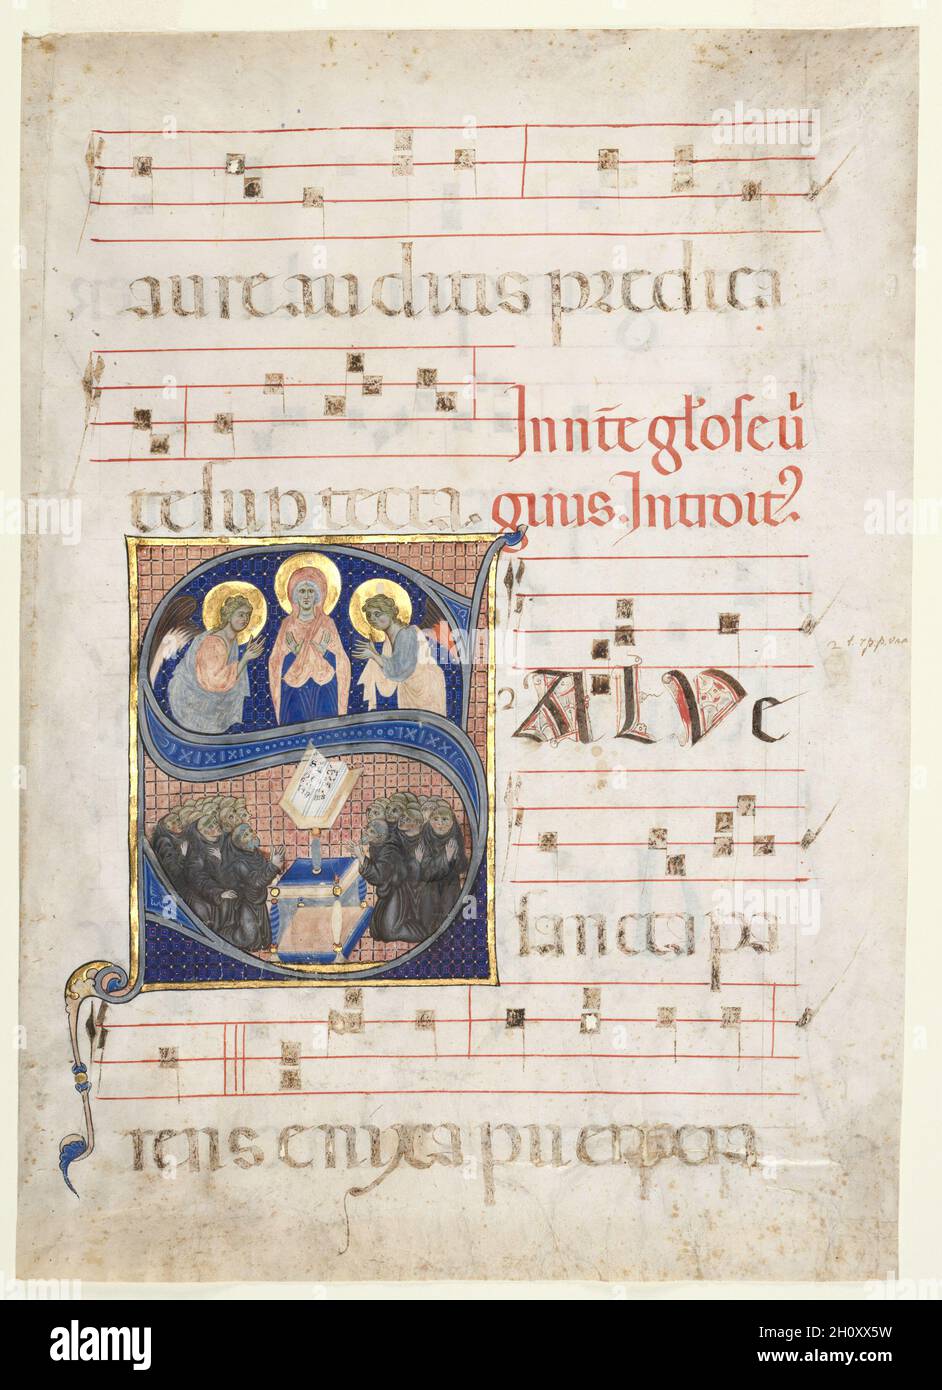 Initial S[alve sancta parens] with the Virgin Adored by Angels, and Singing Benedictine Monks: Single Leaf from a Gradual, c. 1270. South Italy, 13th century. Ink, tempera, and gold on parchment; sheet: 47 x 34 cm (18 1/2 x 13 3/8 in.).  This large initial S introduces the introit (beginning) for a Saturday Votive Mass of the Virgin Mary. The text begins Salve sancta parens...(Hail Holy Parent [Mother]...). The double curve of the letter creates two registers for the representation of independent scenes. The initial is set within a rectangular frame and against a background of diapers (geometr Stock Photo